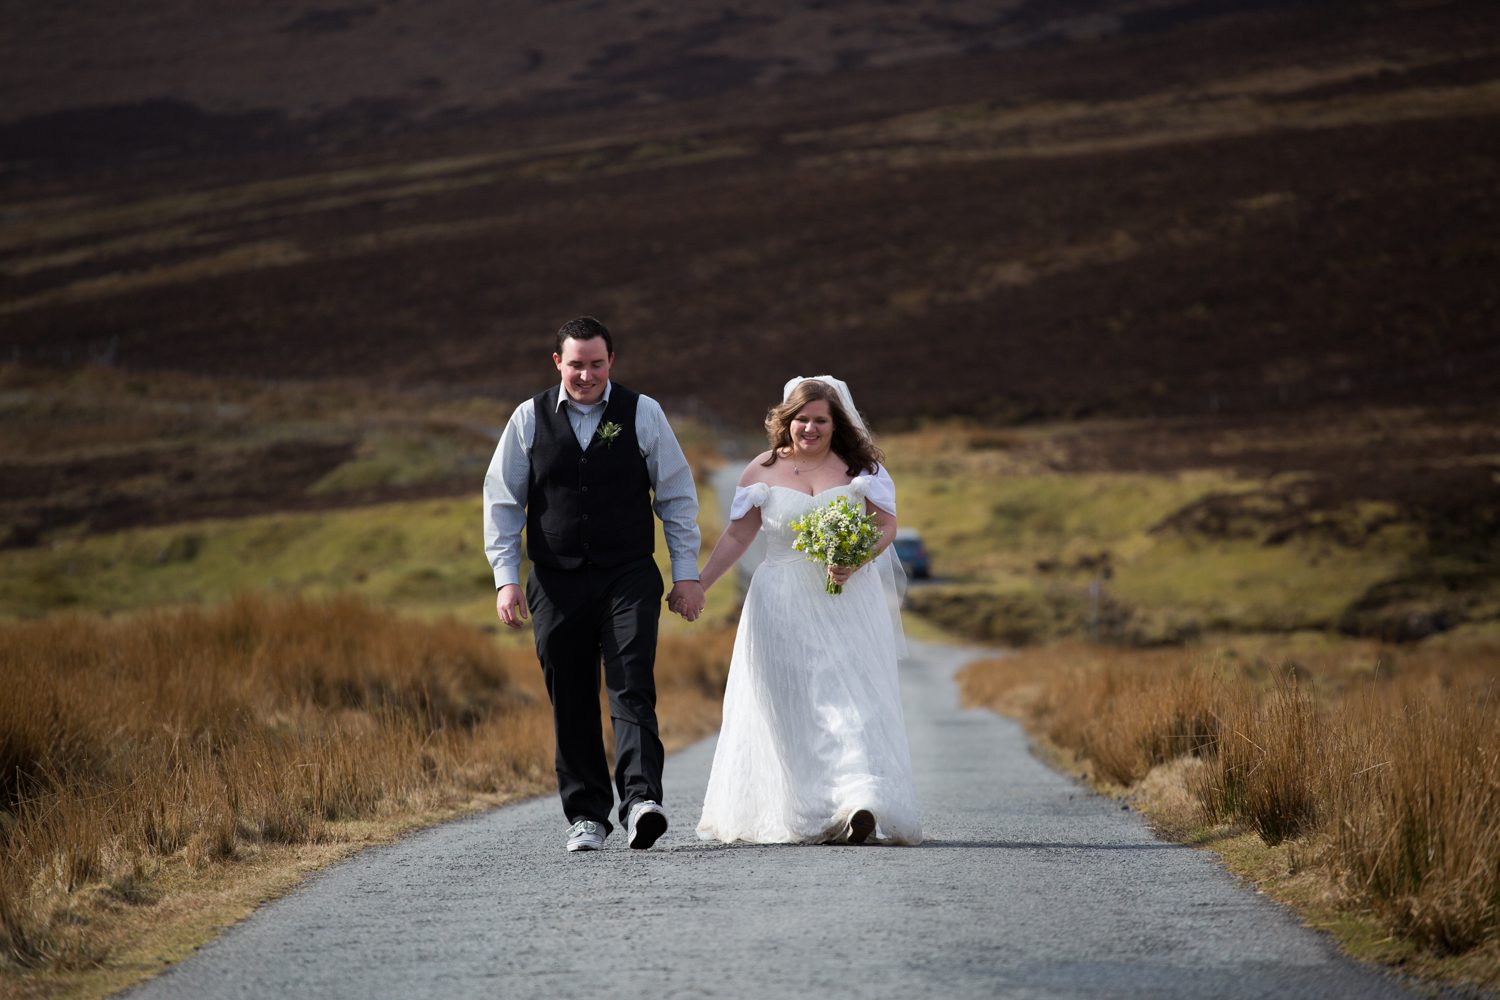 Walking the moor road from the Fairy Glen to the Quiraing, Isle of Skye on their wedding day